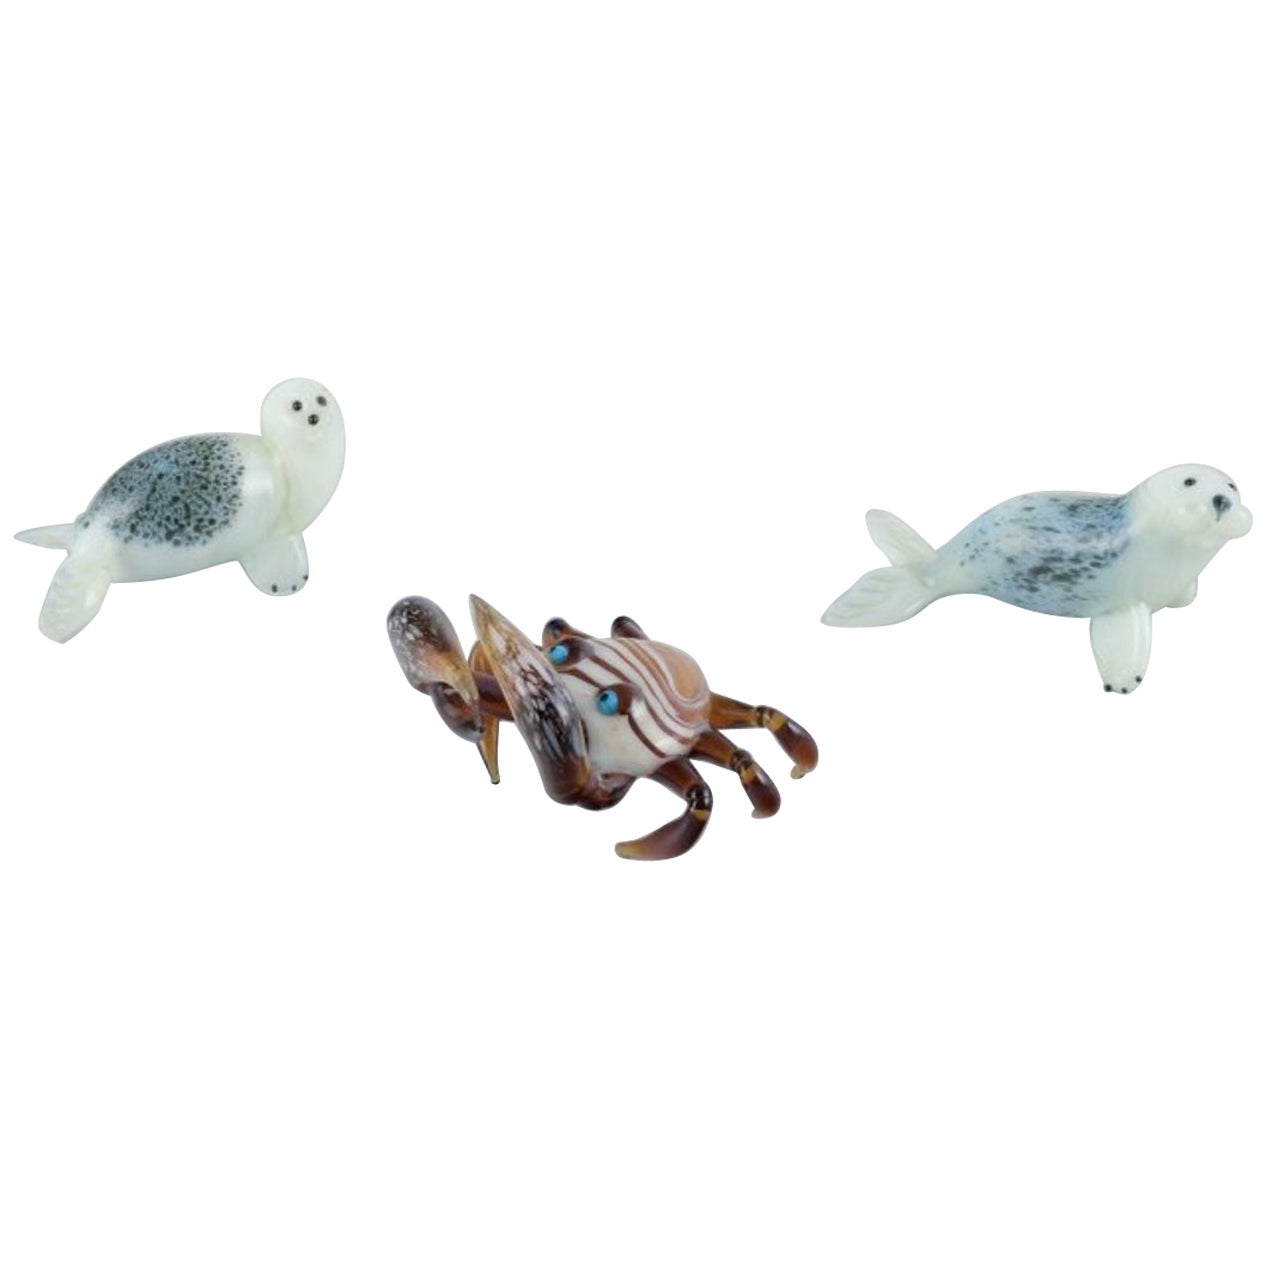 Murano, Italy. Three miniature glass animal figurines. Two seals and a crab. For Sale